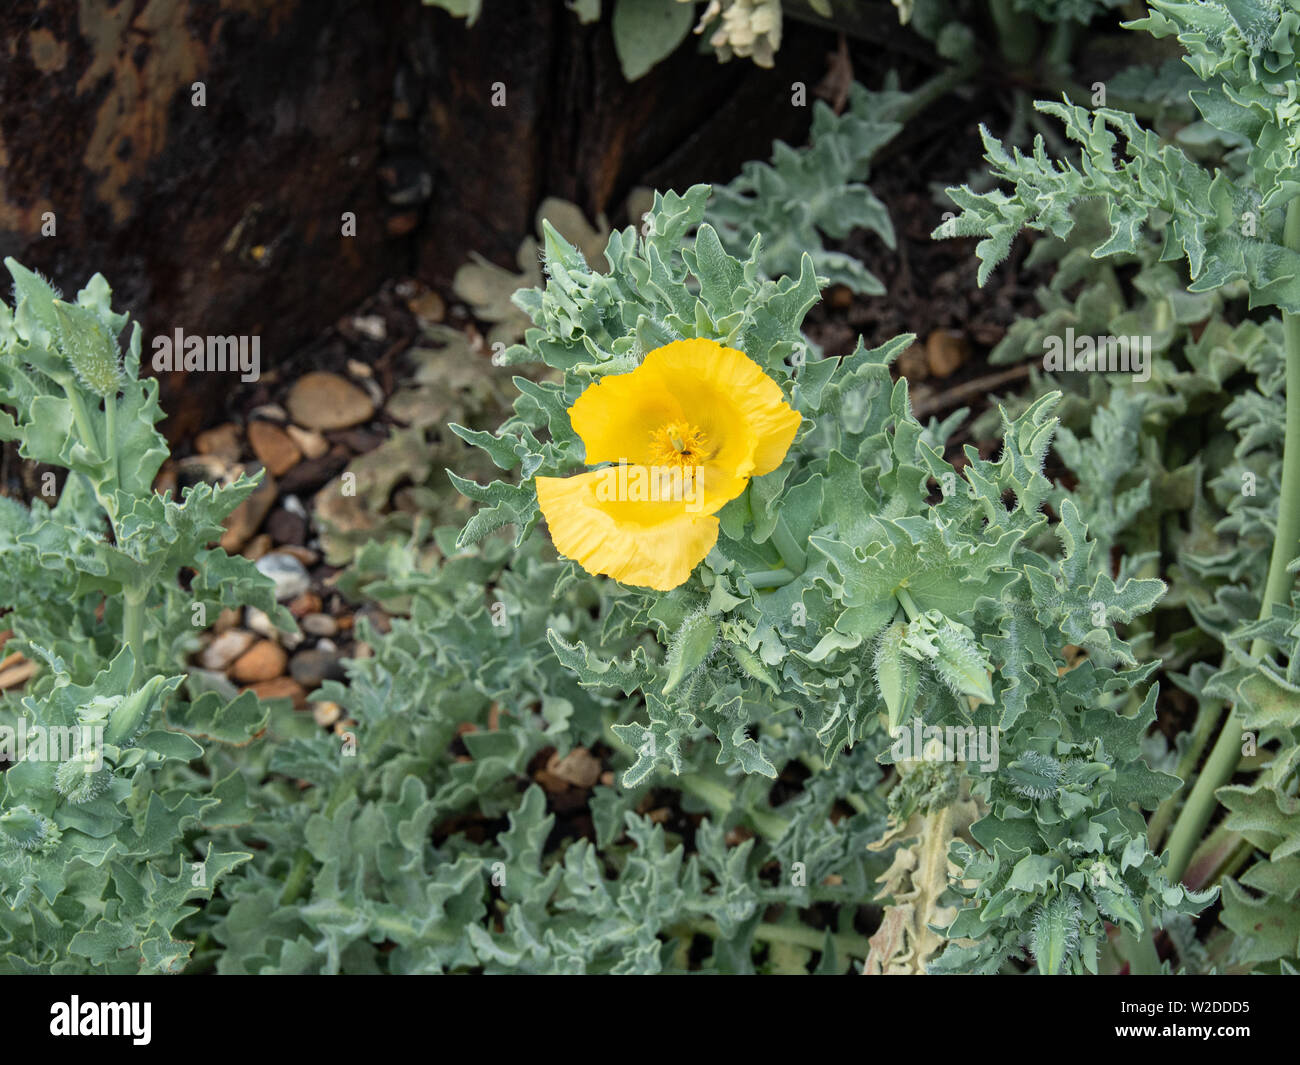 The bright yellow flower of the yellow horned sea poppy Glaucium flavum against the the glaucous grey foliage Stock Photo